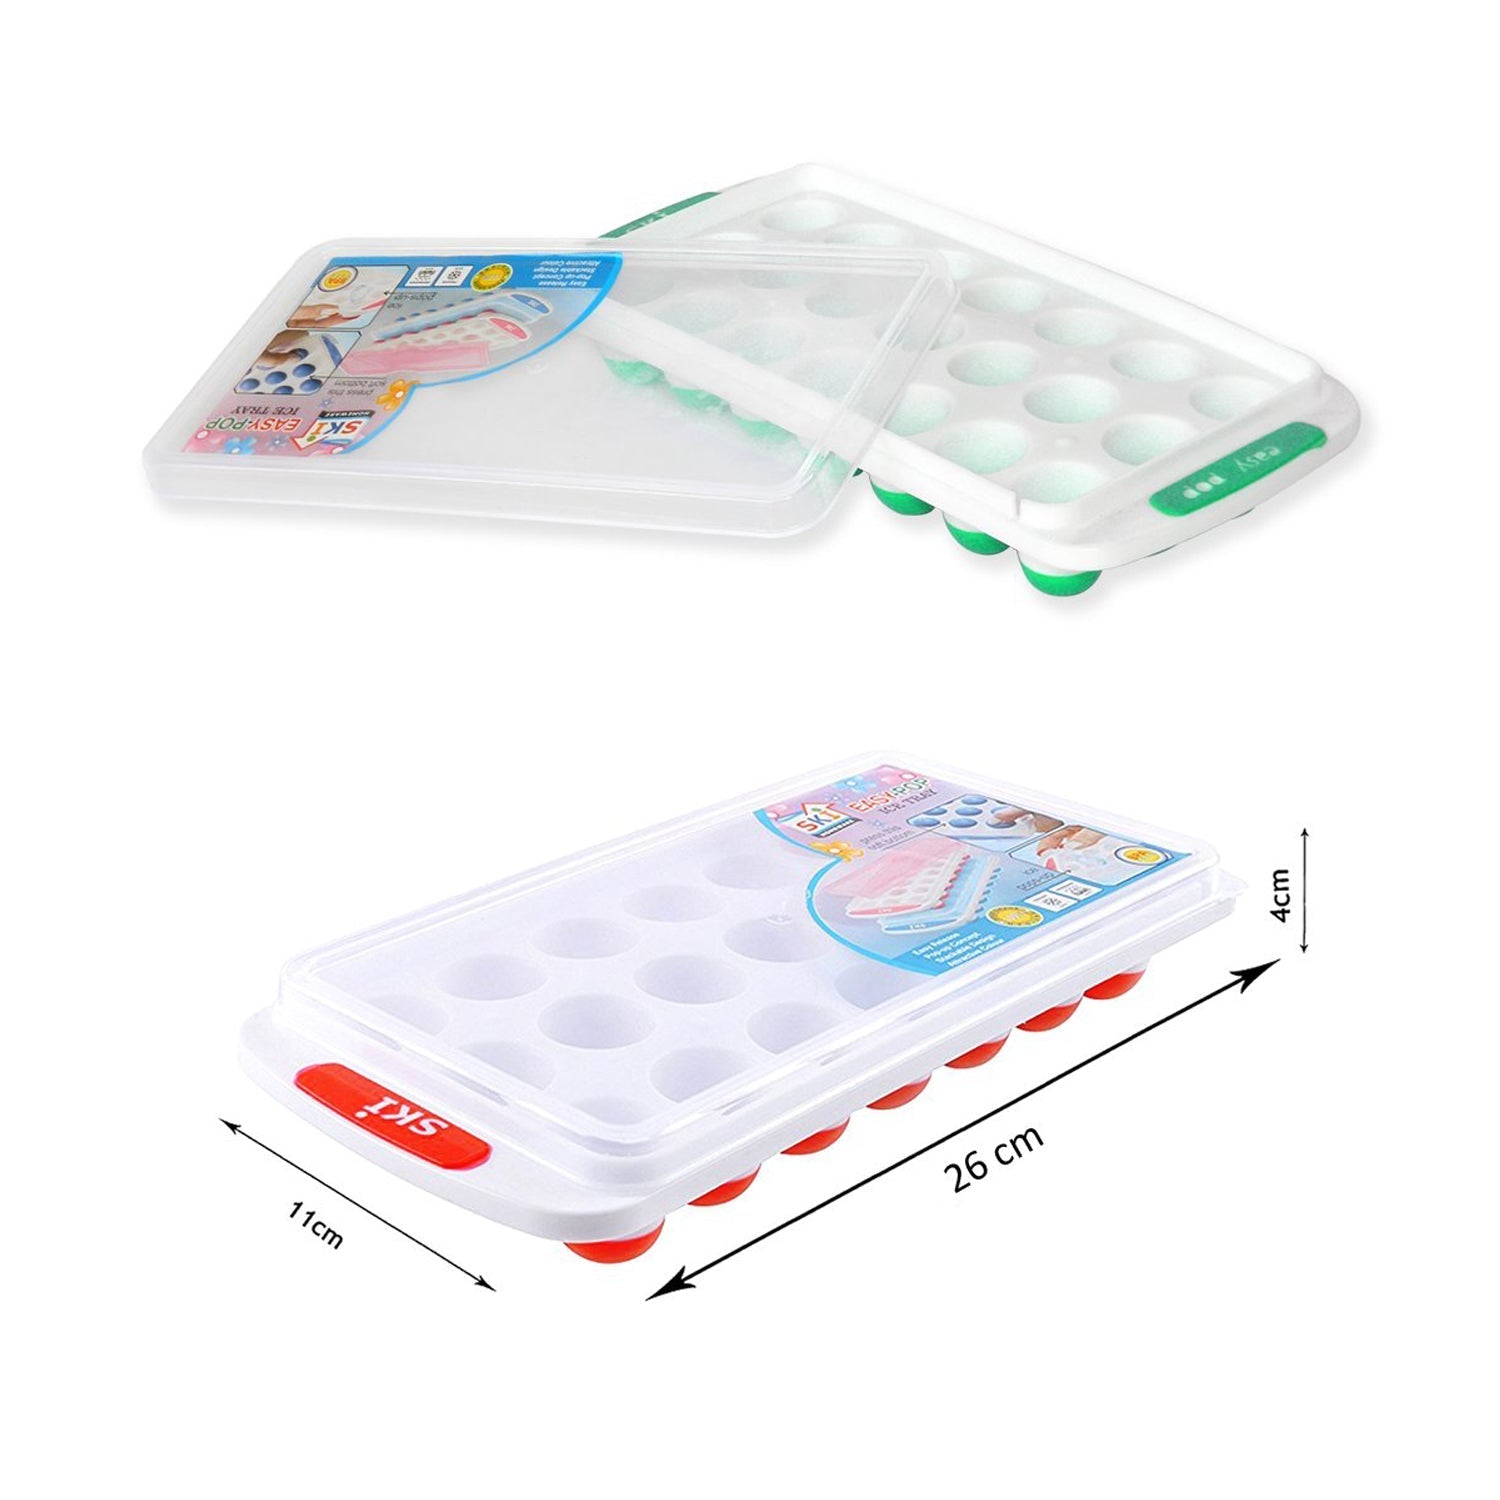 2750 21 Cavity Pop Ice Tray Used for Making Ice's Easily Without Any Difficulty. freeshipping - DeoDap